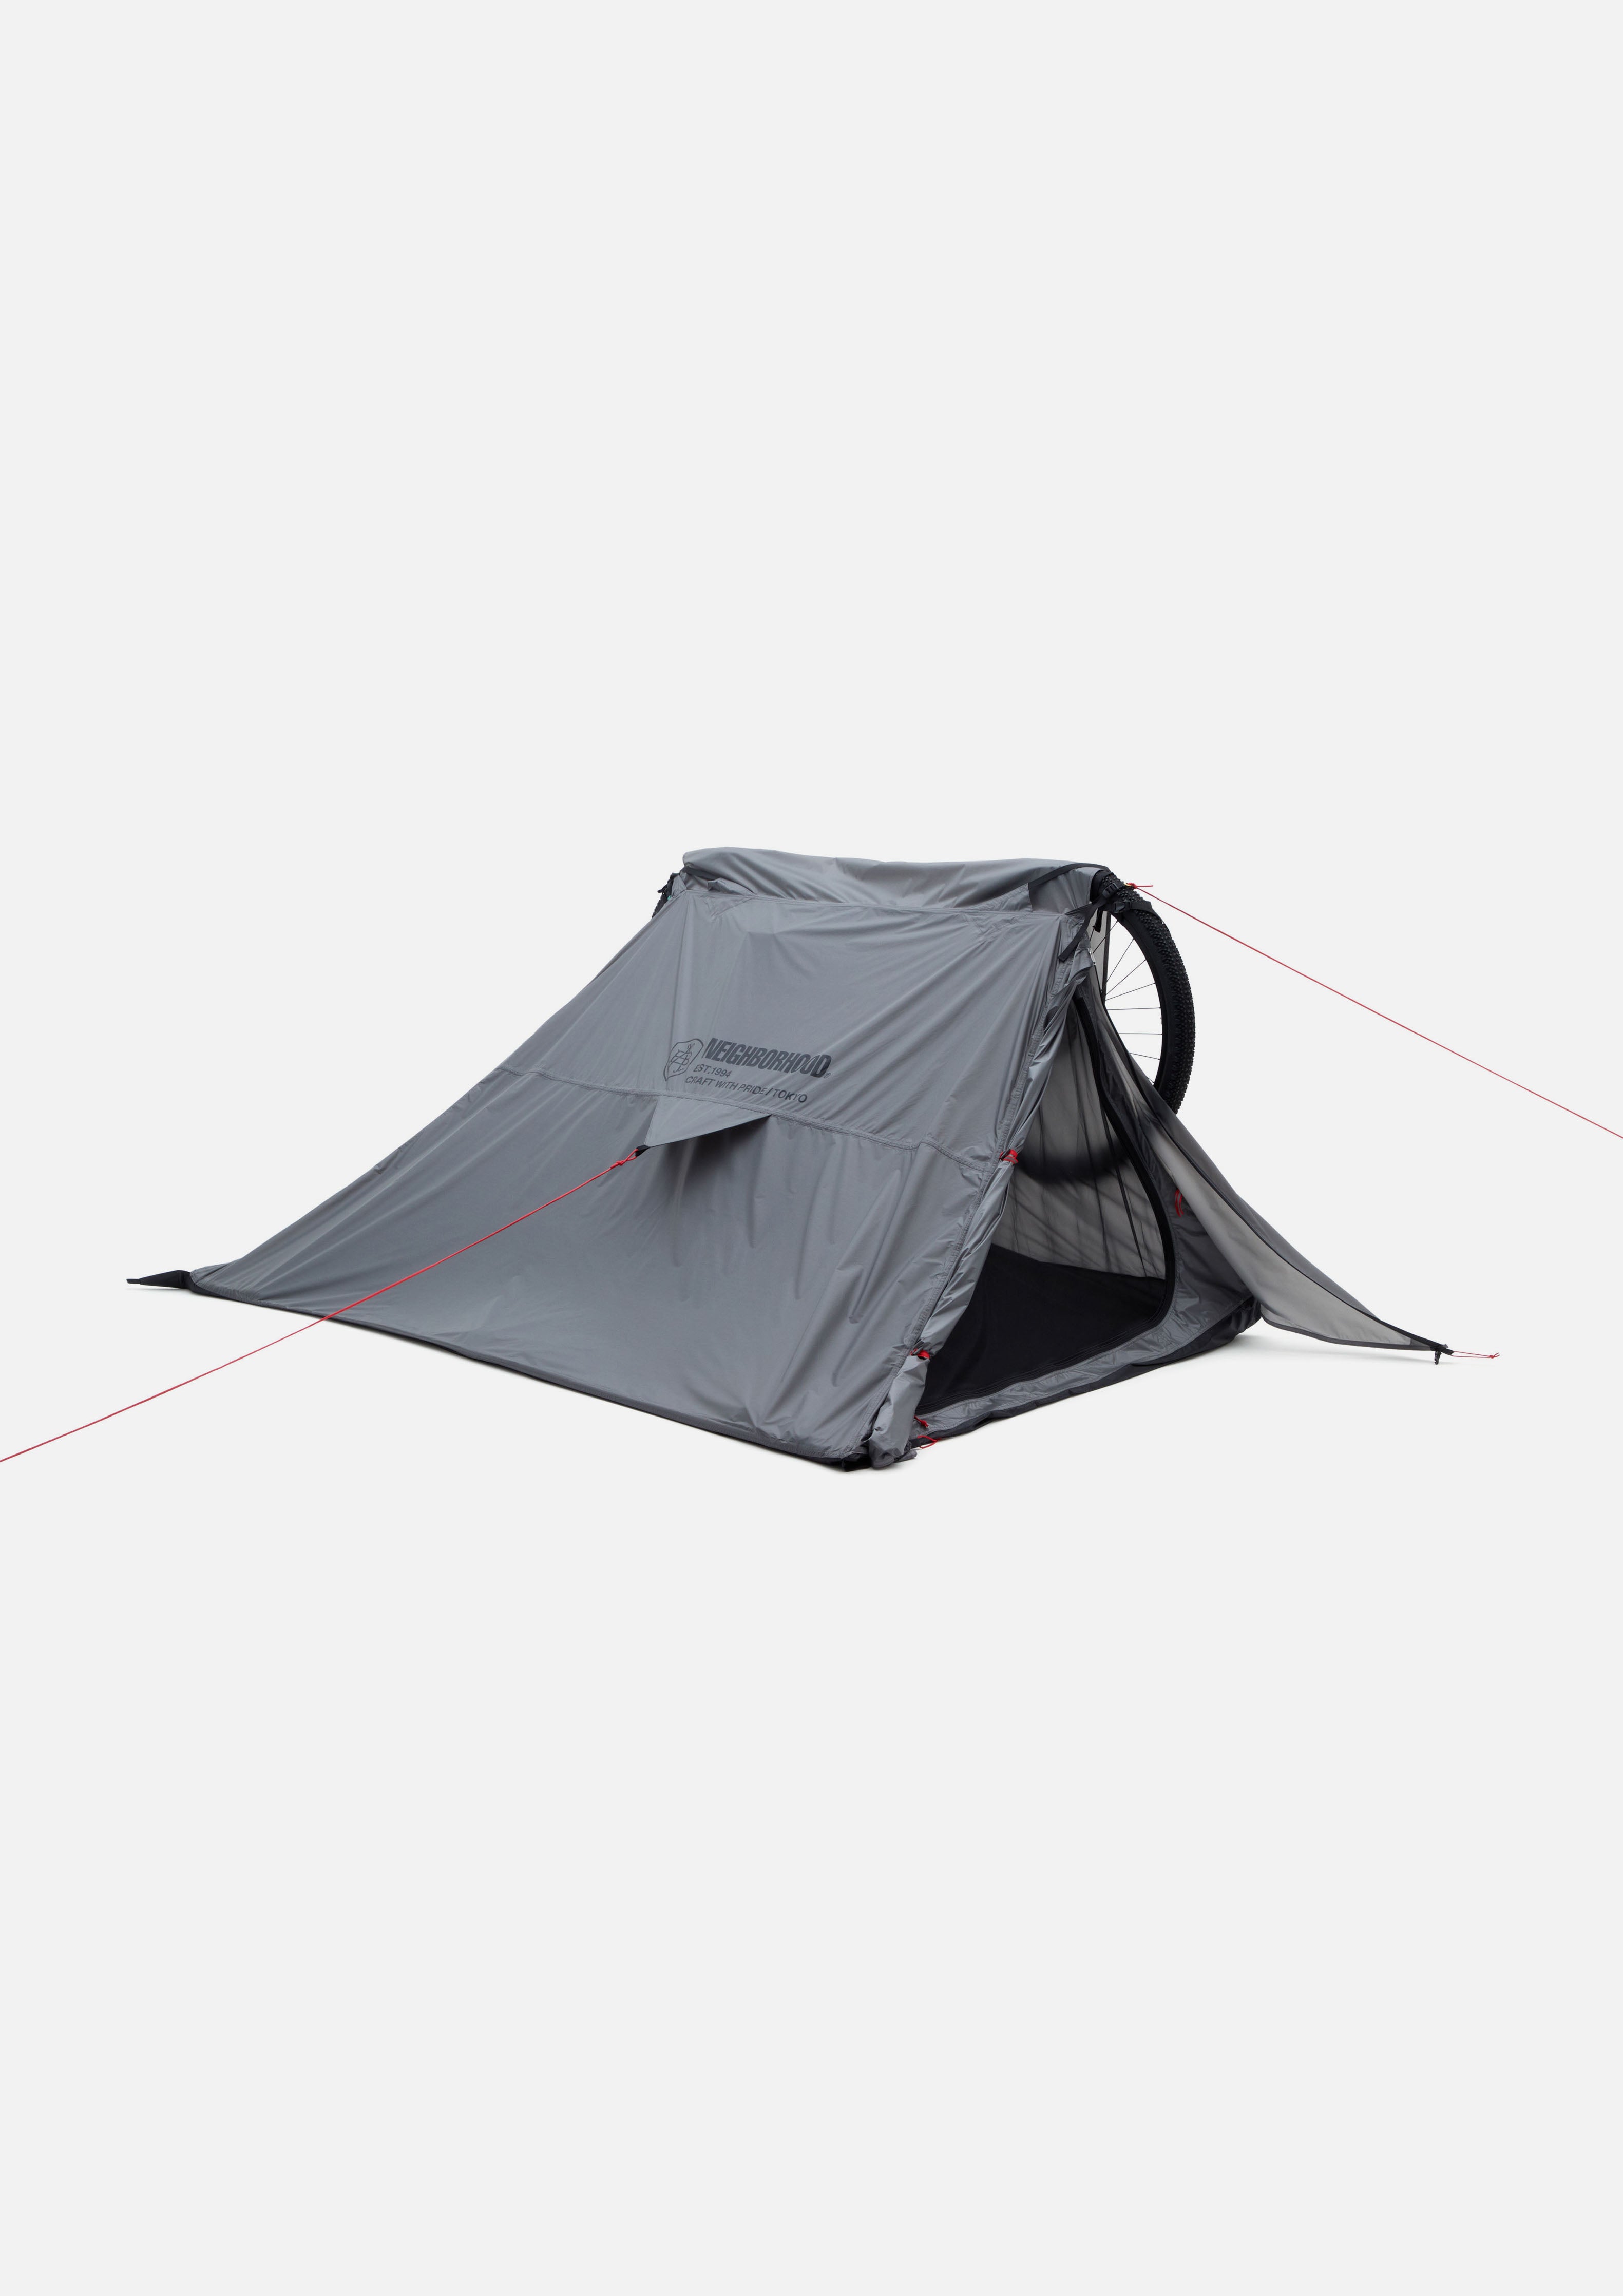 NH X ABEL BROWN . NOMAD 4 MOTORCYCLE TENT